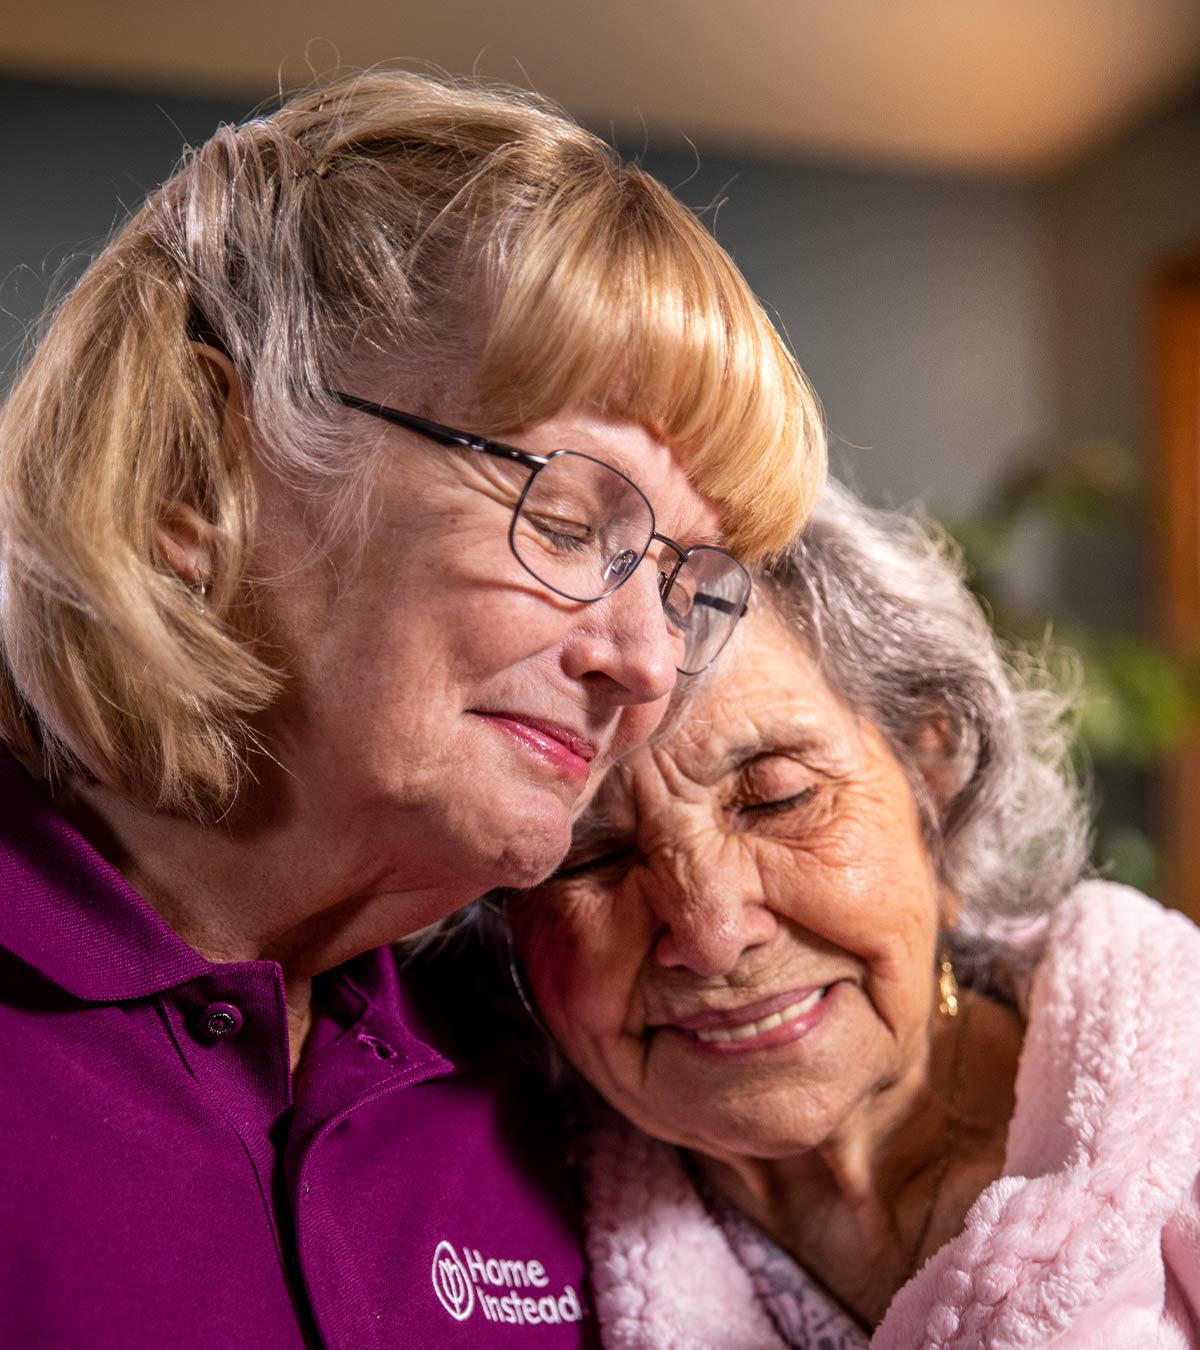 CAREGiver providing in-home senior care services. Home Instead of Edina, MN provides Elder Care to aging adults. 